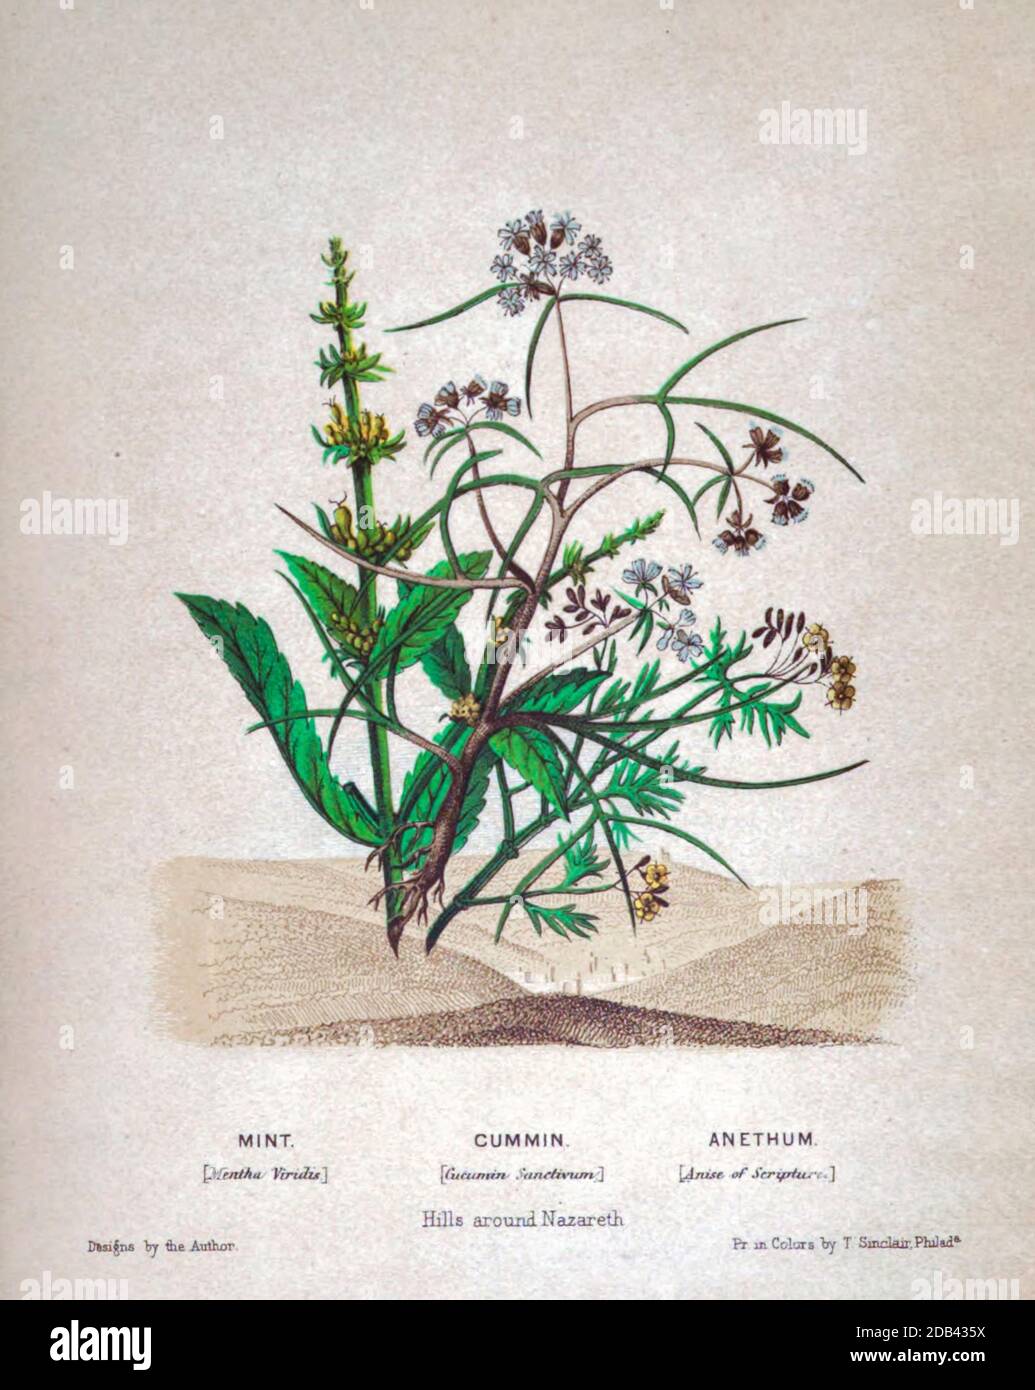 Bouquet of Mint (Mentha viridis), Cummin (Cuminum cyminum), Anethum (Anise) from Plants Of The Holy Land: With Their Fruits And Flowers, Beautifully Illustrated By Original Drawings, Colored From Nature by Rev. Osborn, H. S. (Henry Stafford), 1823-1894 Published in Philadelphia, By J.B. Lippincott & Co. in 1861 Stock Photo